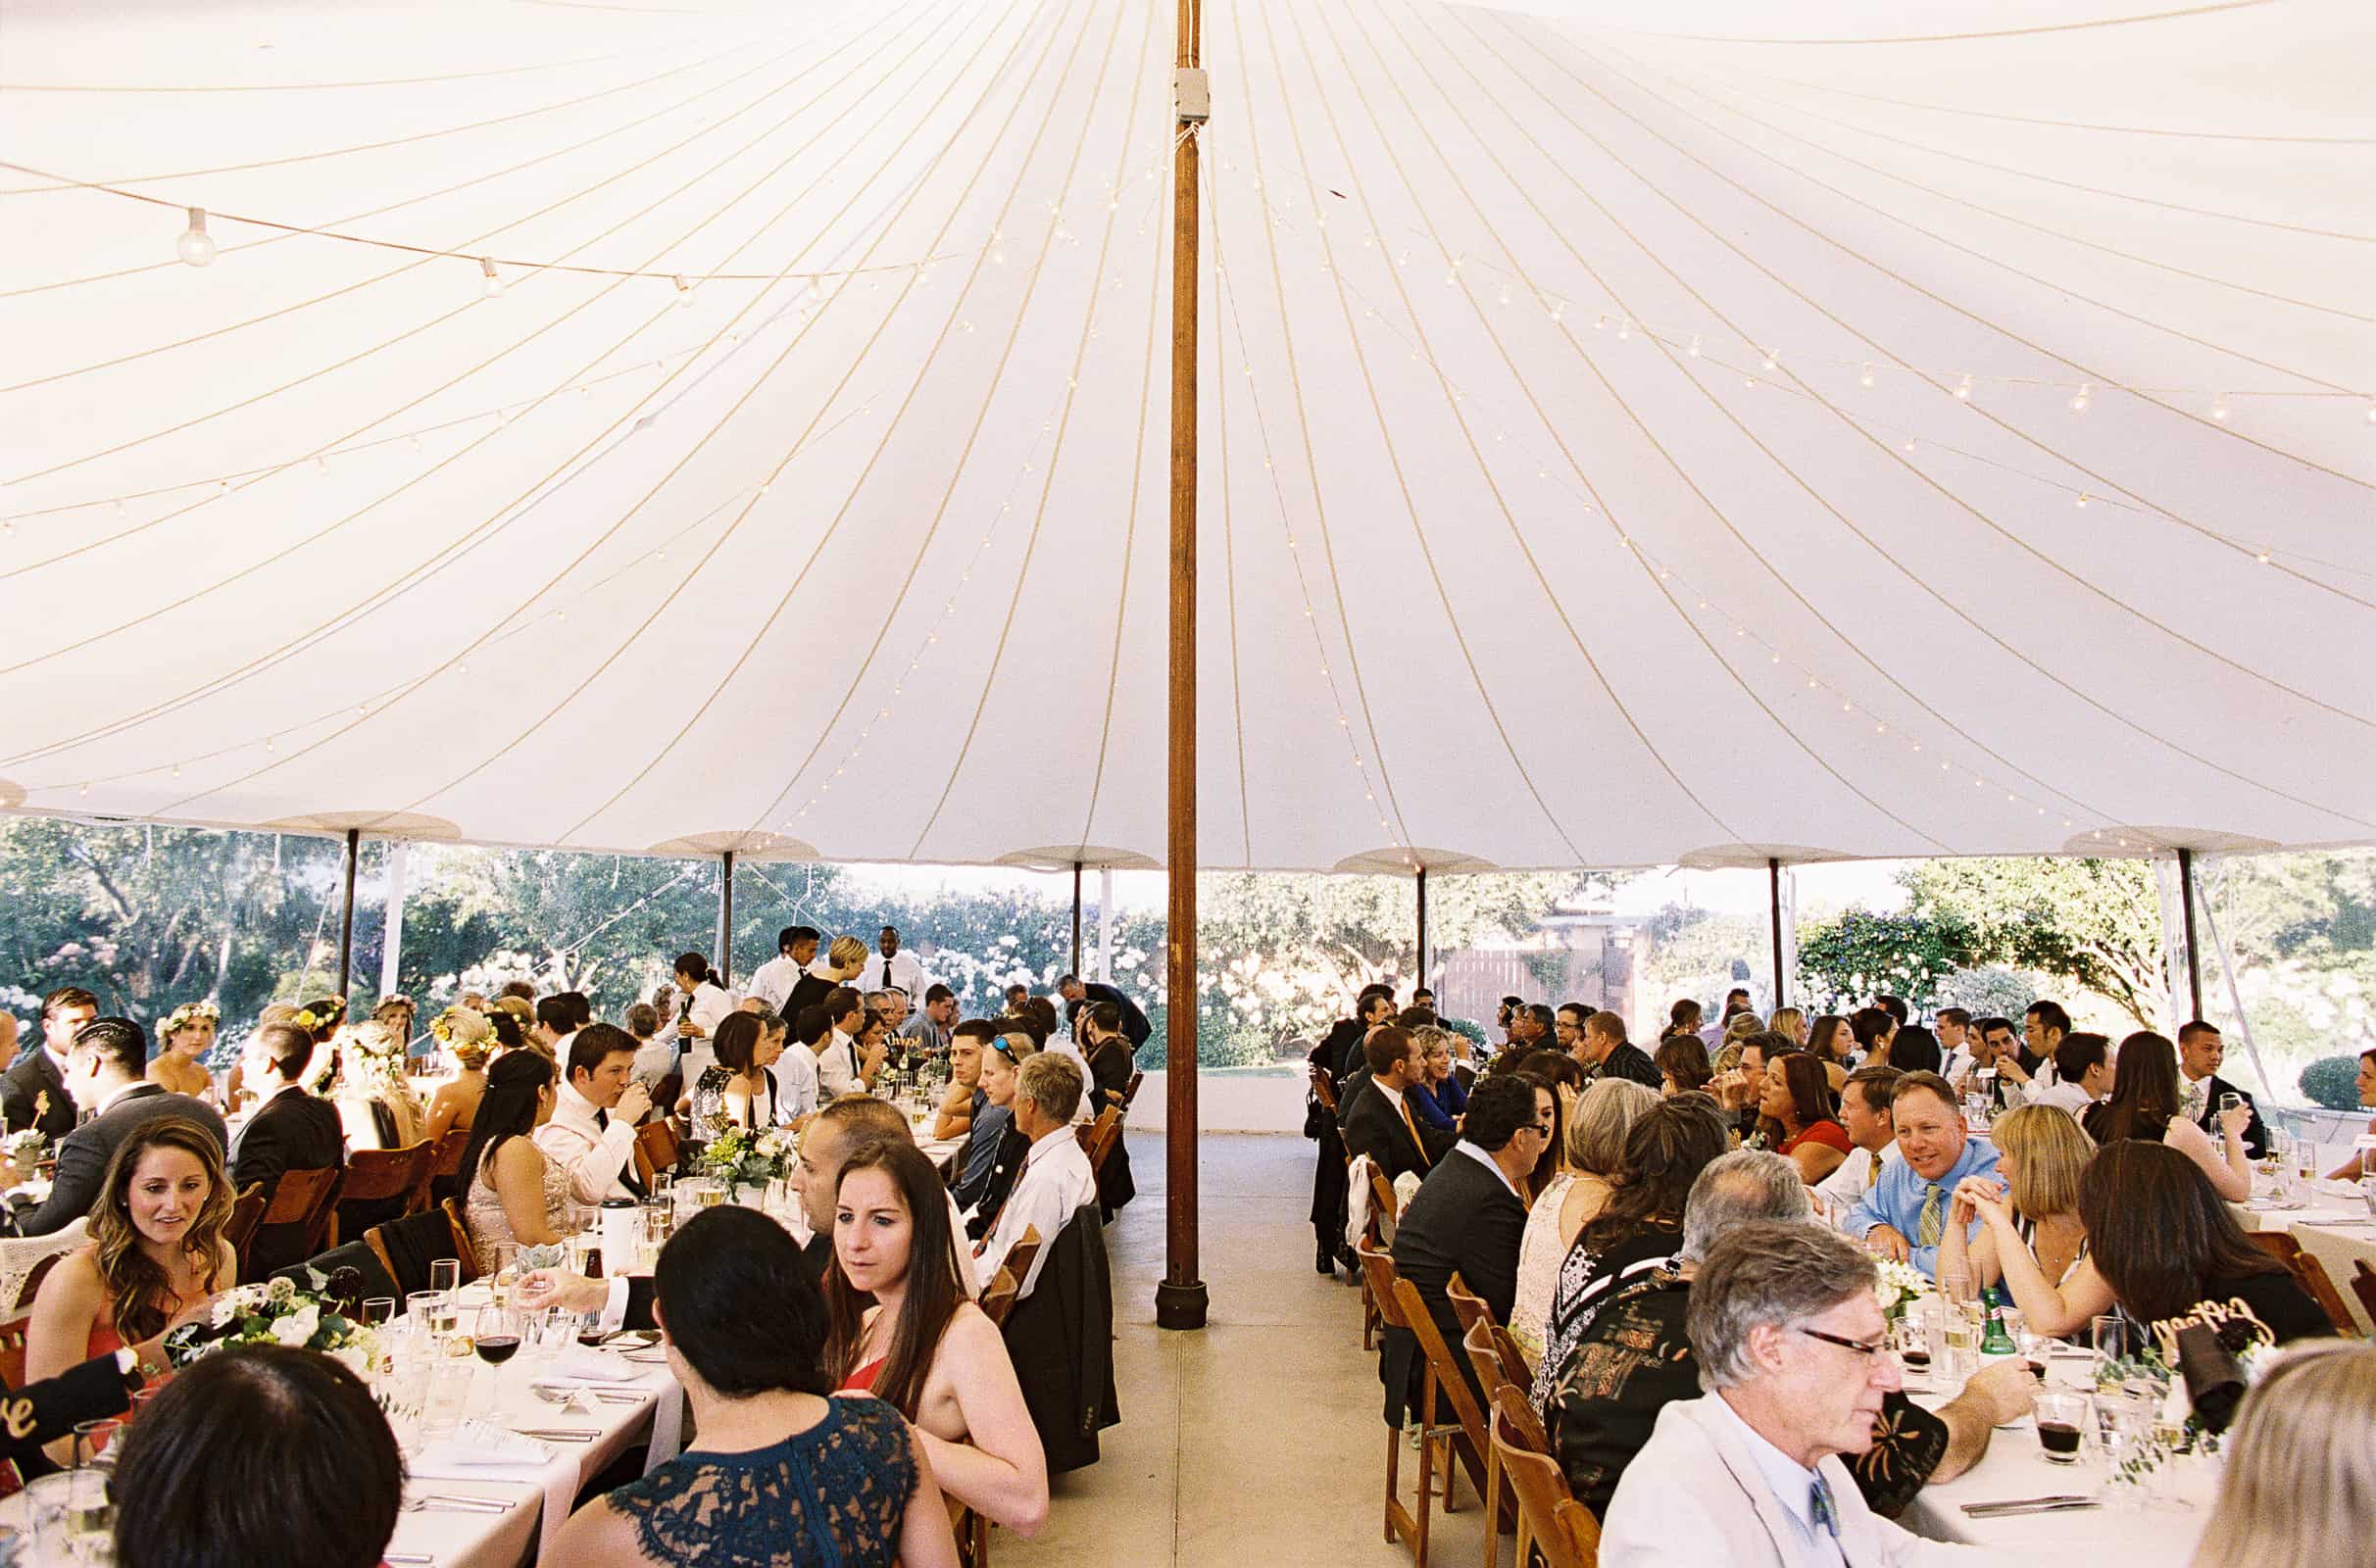 guests dining in a circus tent